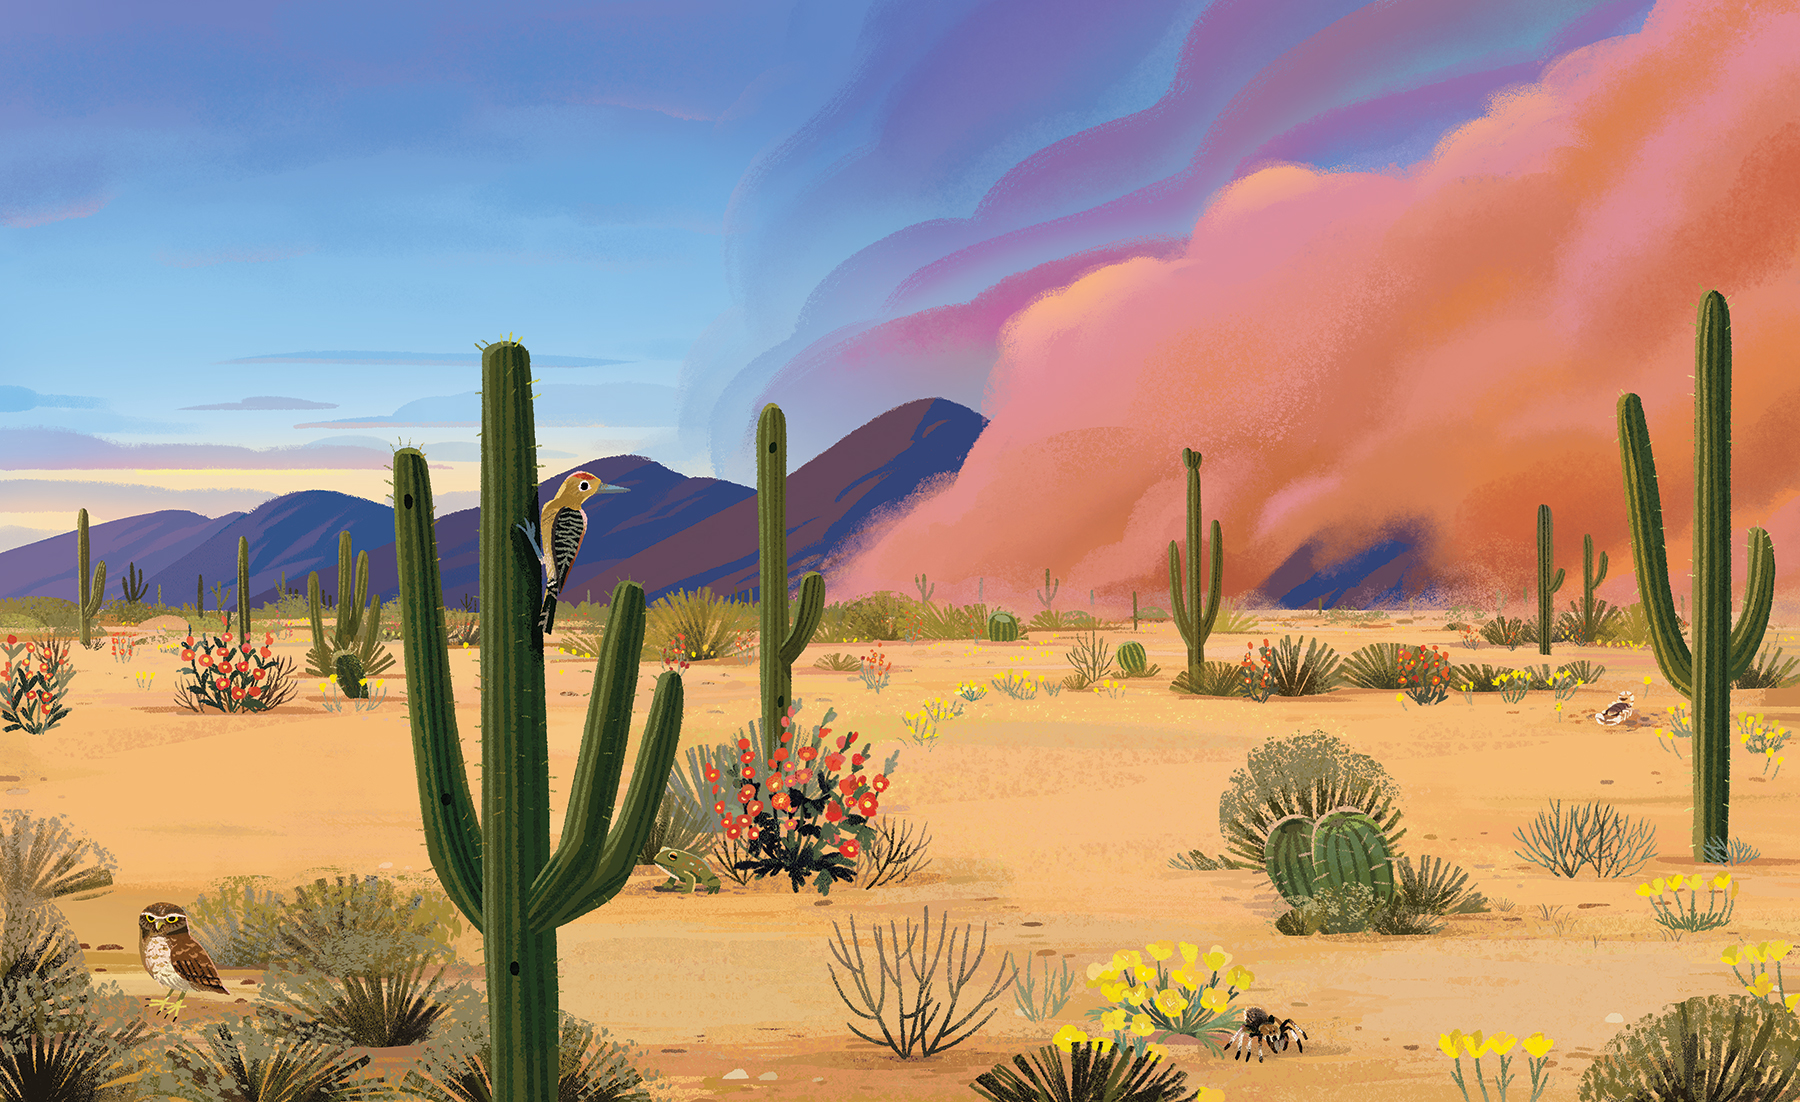 An illustration by Kim Smith from The Green Planet. It shows a desert with mountains in the background and there are lots of saguaro cactus' as well as other desert plants